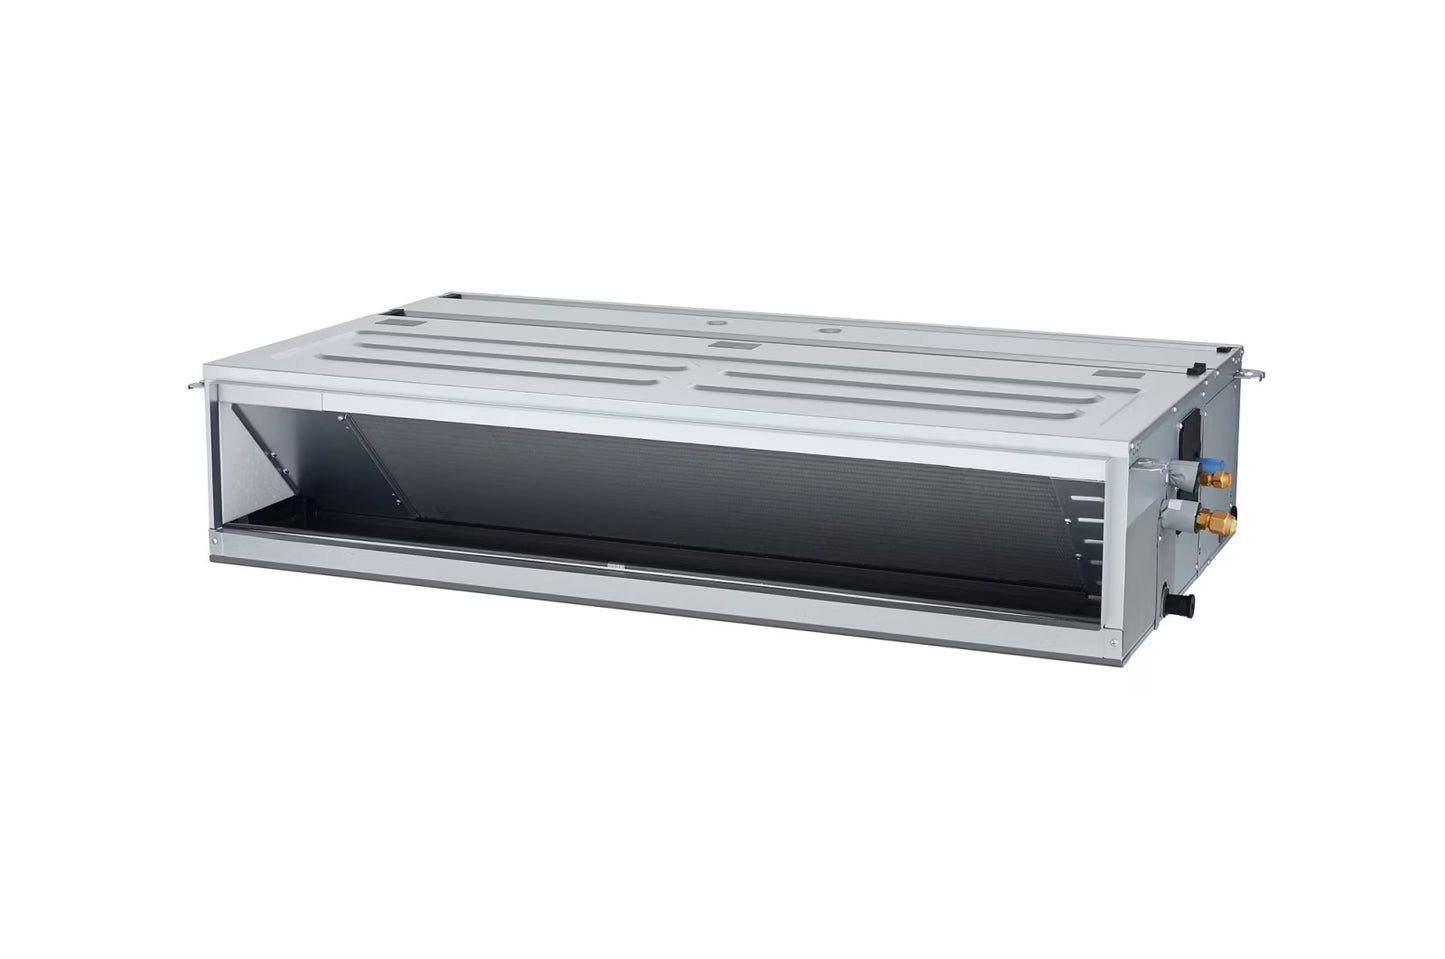 LG Ceiling Concealed Duct INV Unit 5.6KW with Mid Static and E.S.P. Control for Multiple Rooms - ARNU18GM1A4